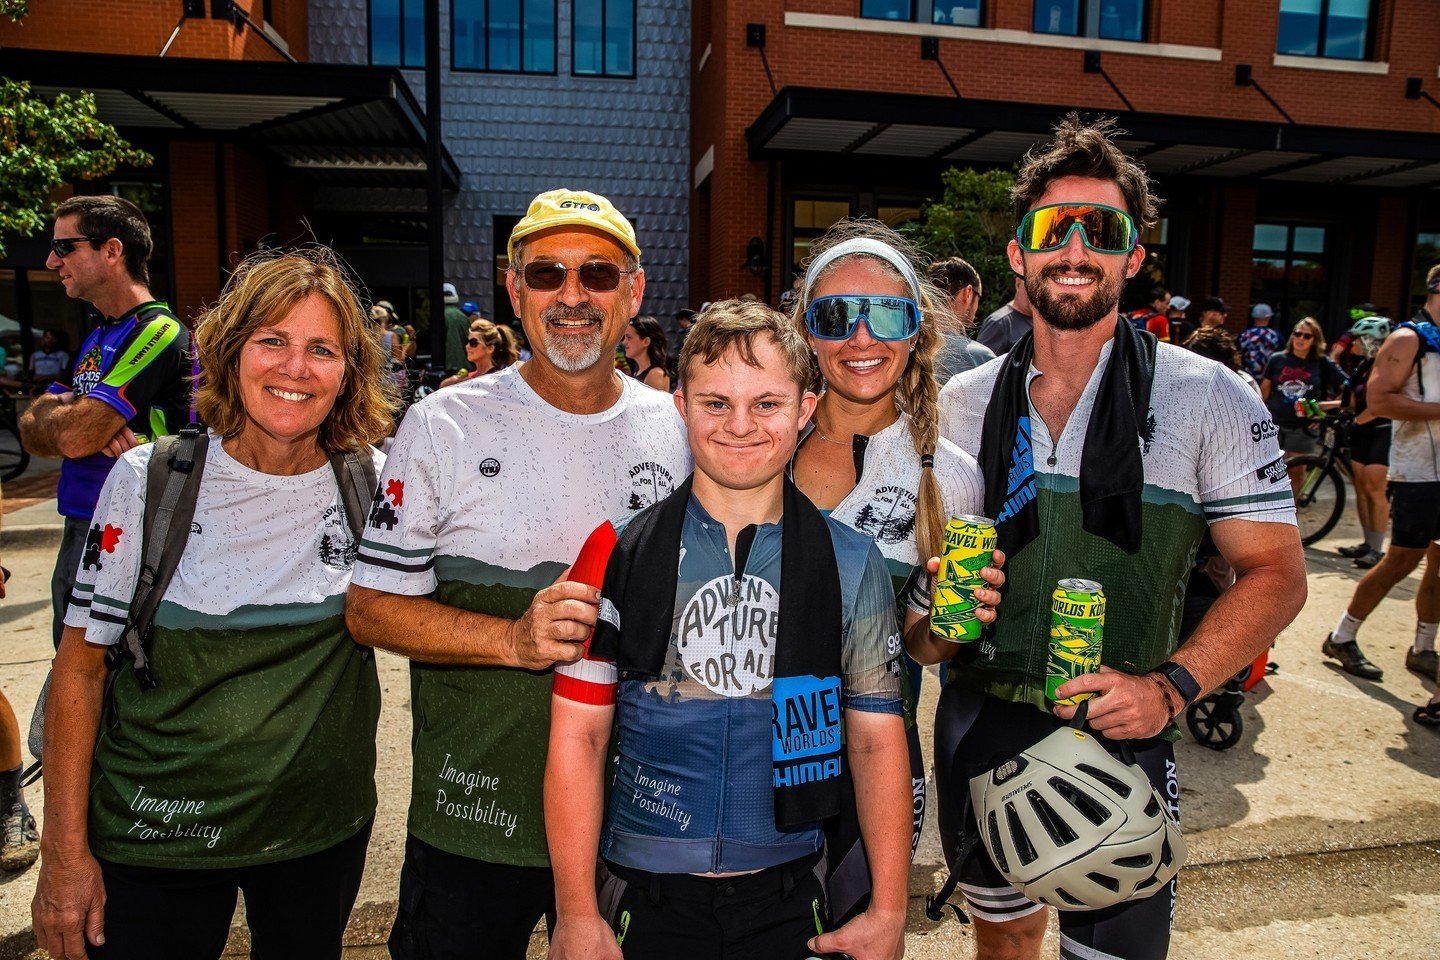 Happy Mother's Day to all the incredible moms out there!!⁠
-⁠
Photo of Joey Barr and Family with @adventureforallfund. ⁠
@McColganPhoto